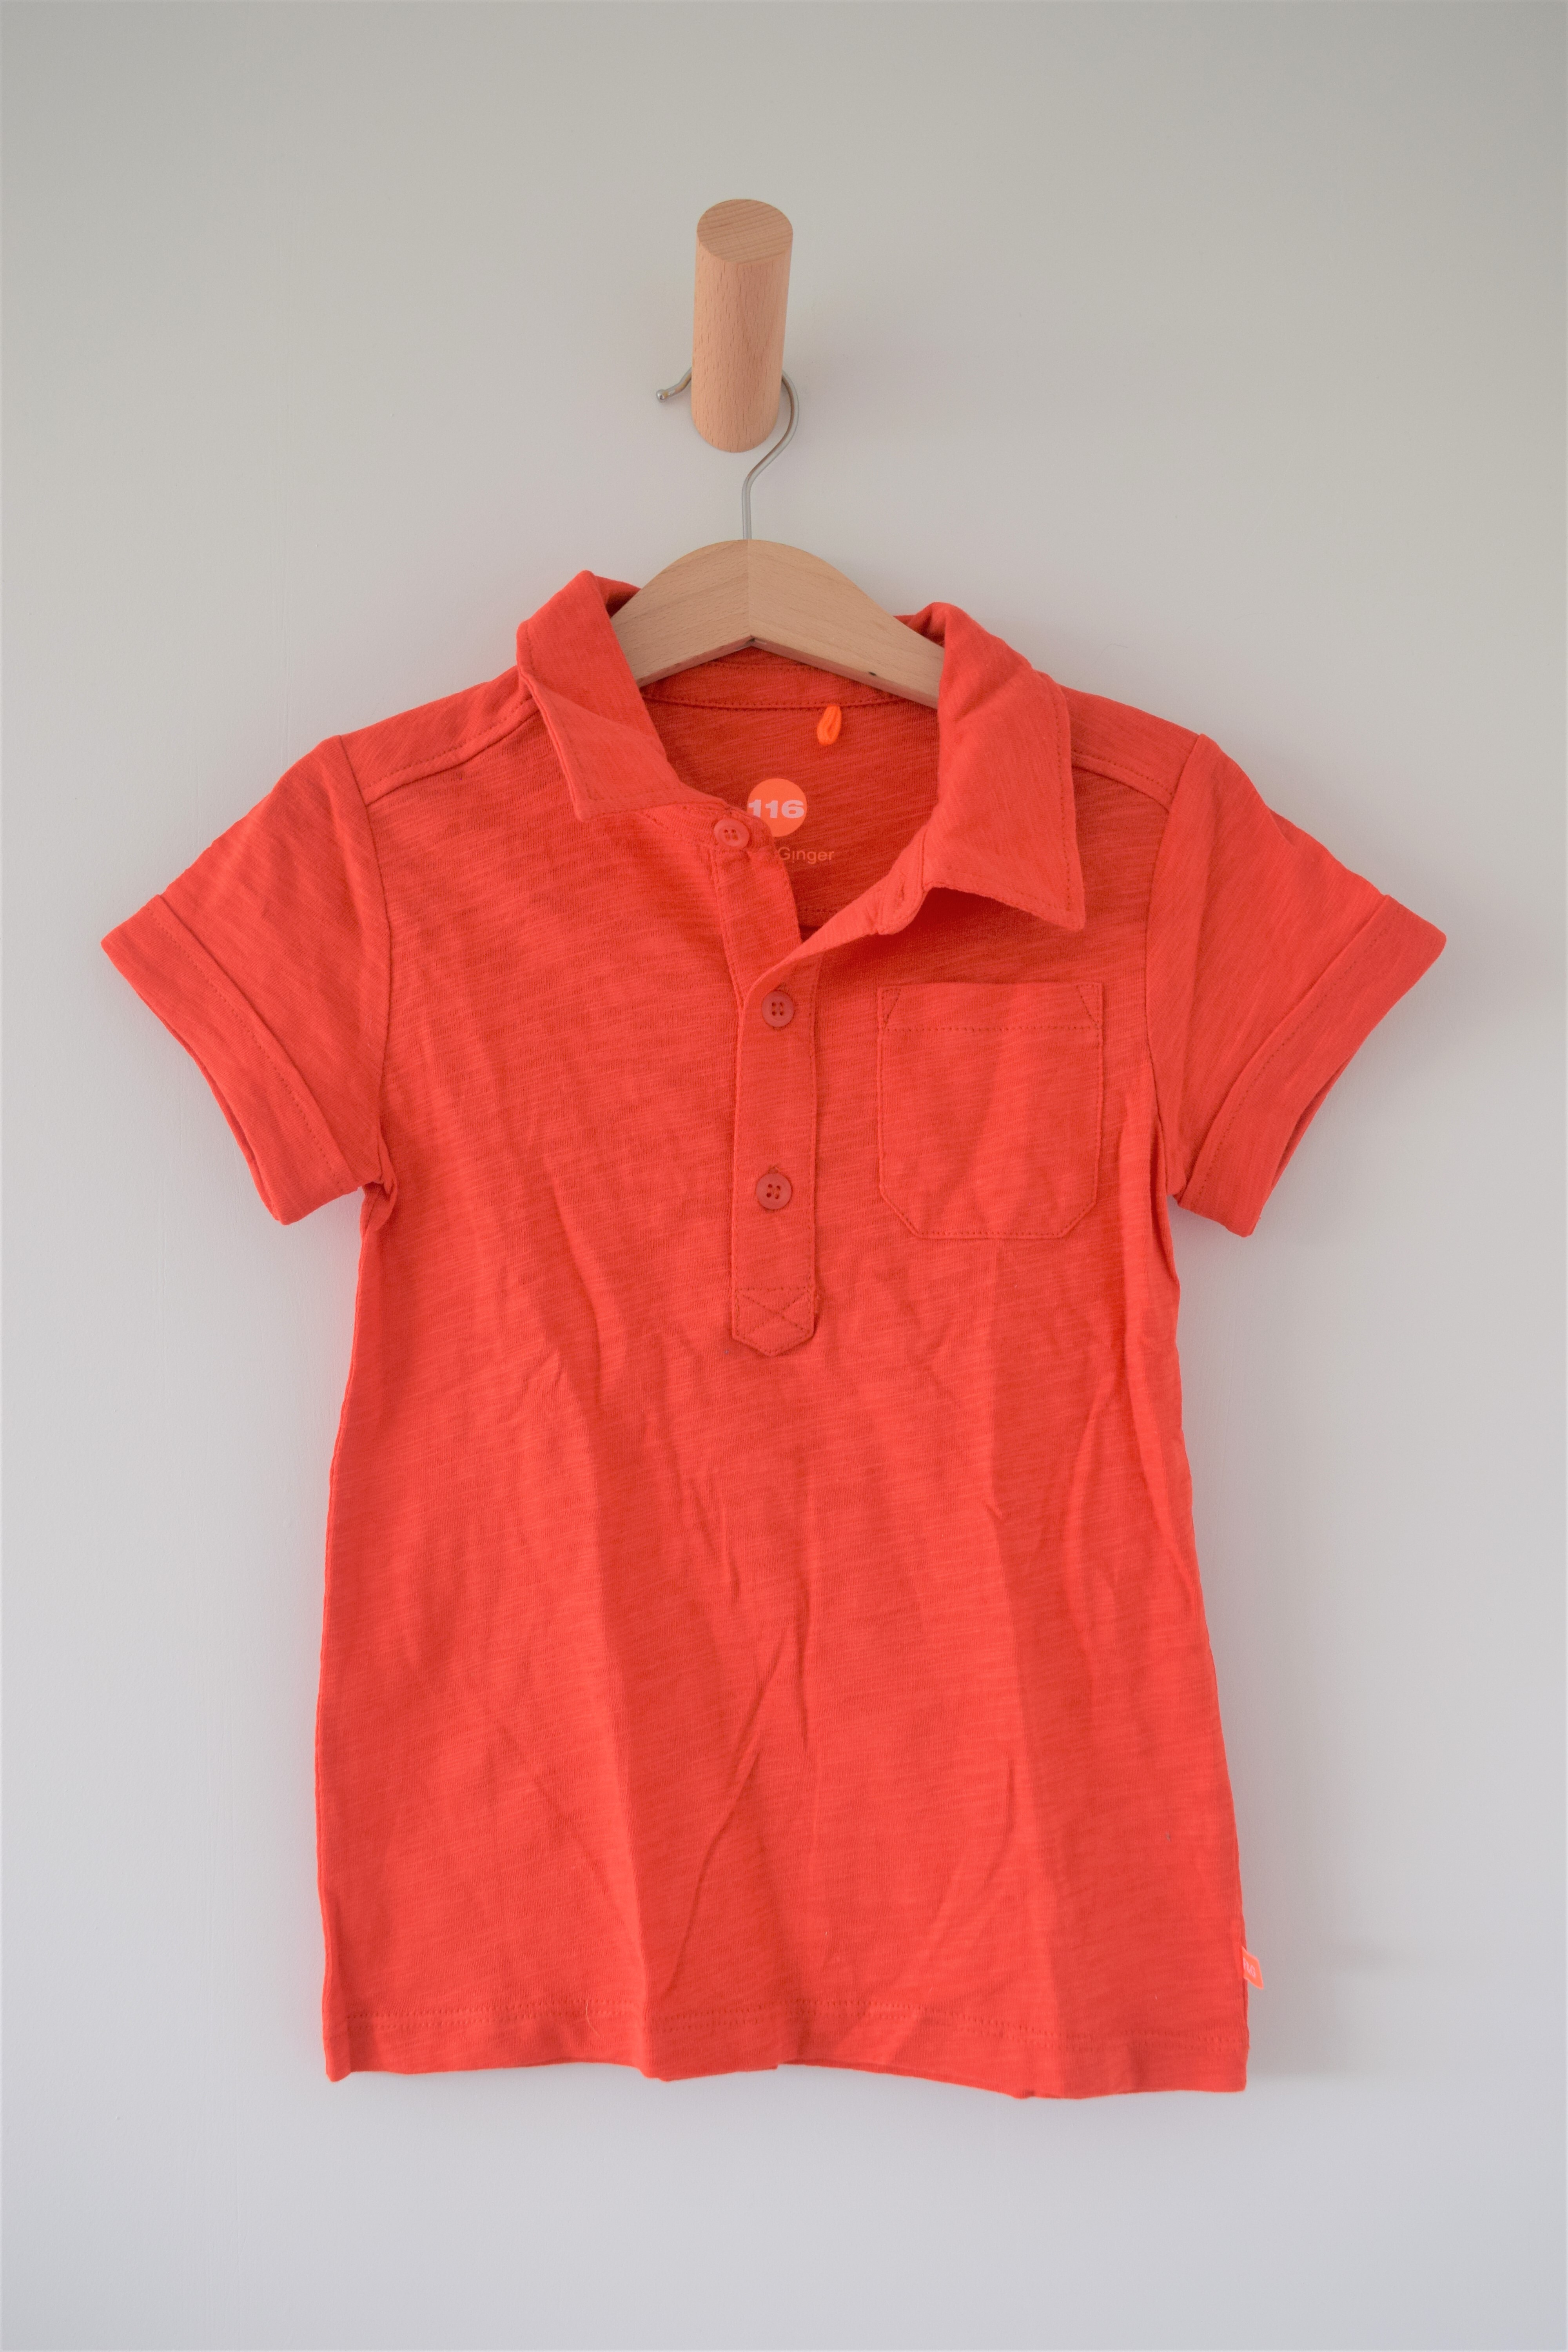 Polo T-shirt, Fred & Ginger, 116